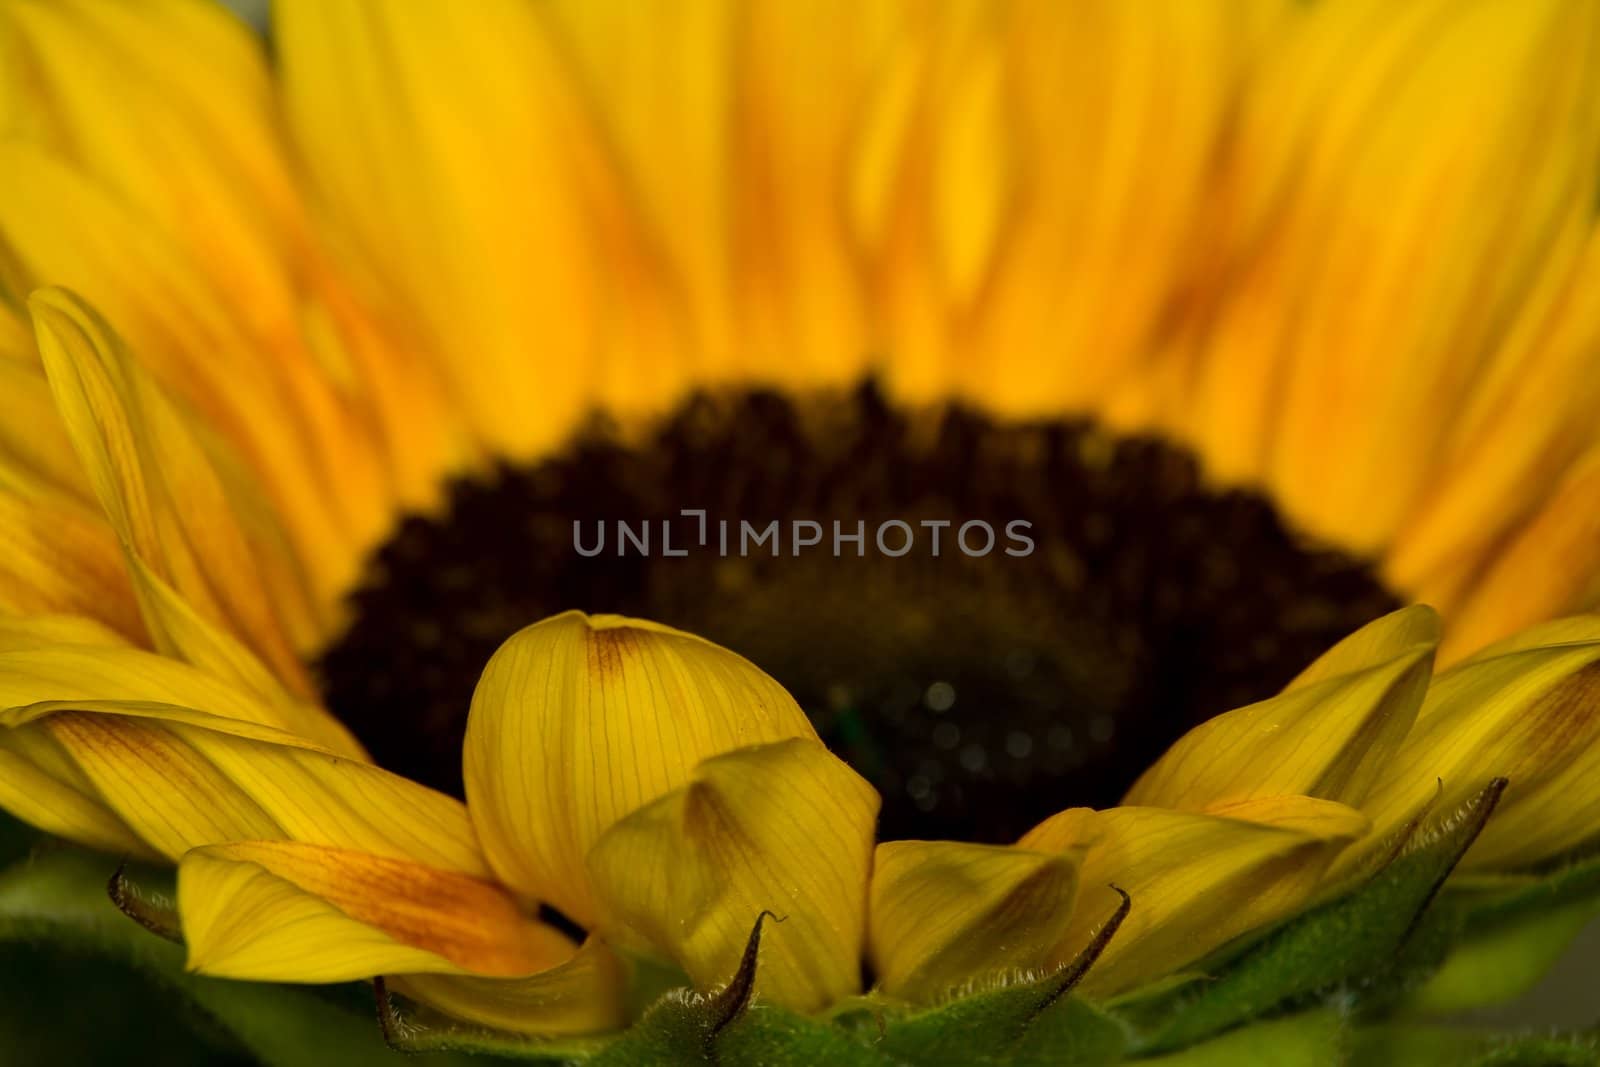 The image closeup of a flower of a sunflower